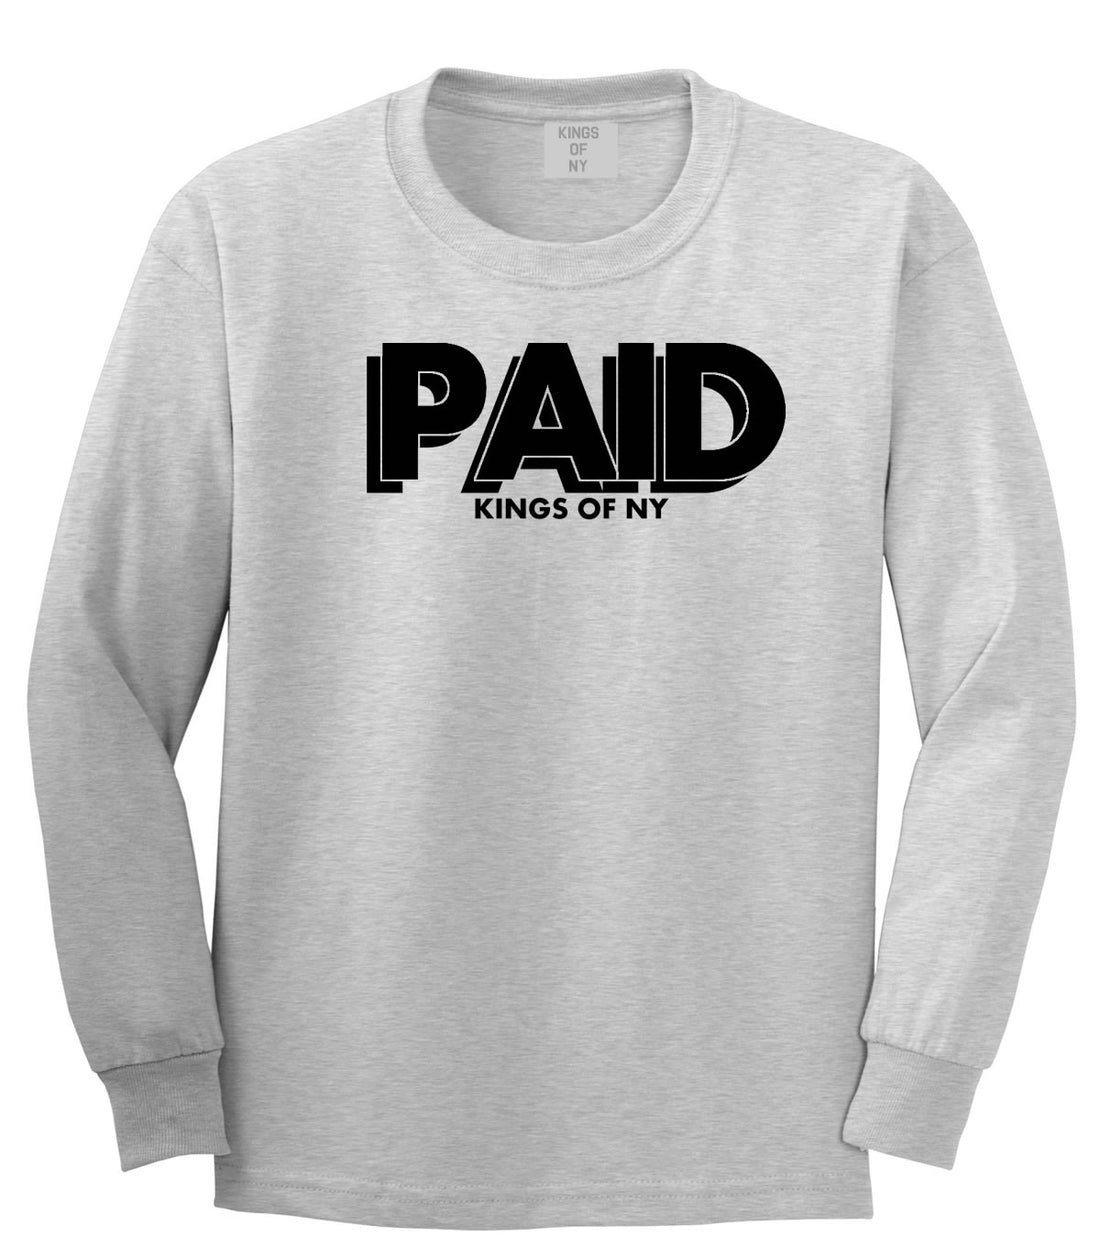 PAID Kings Of NY W15 Long Sleeve T-Shirt in Grey By Kings Of NY